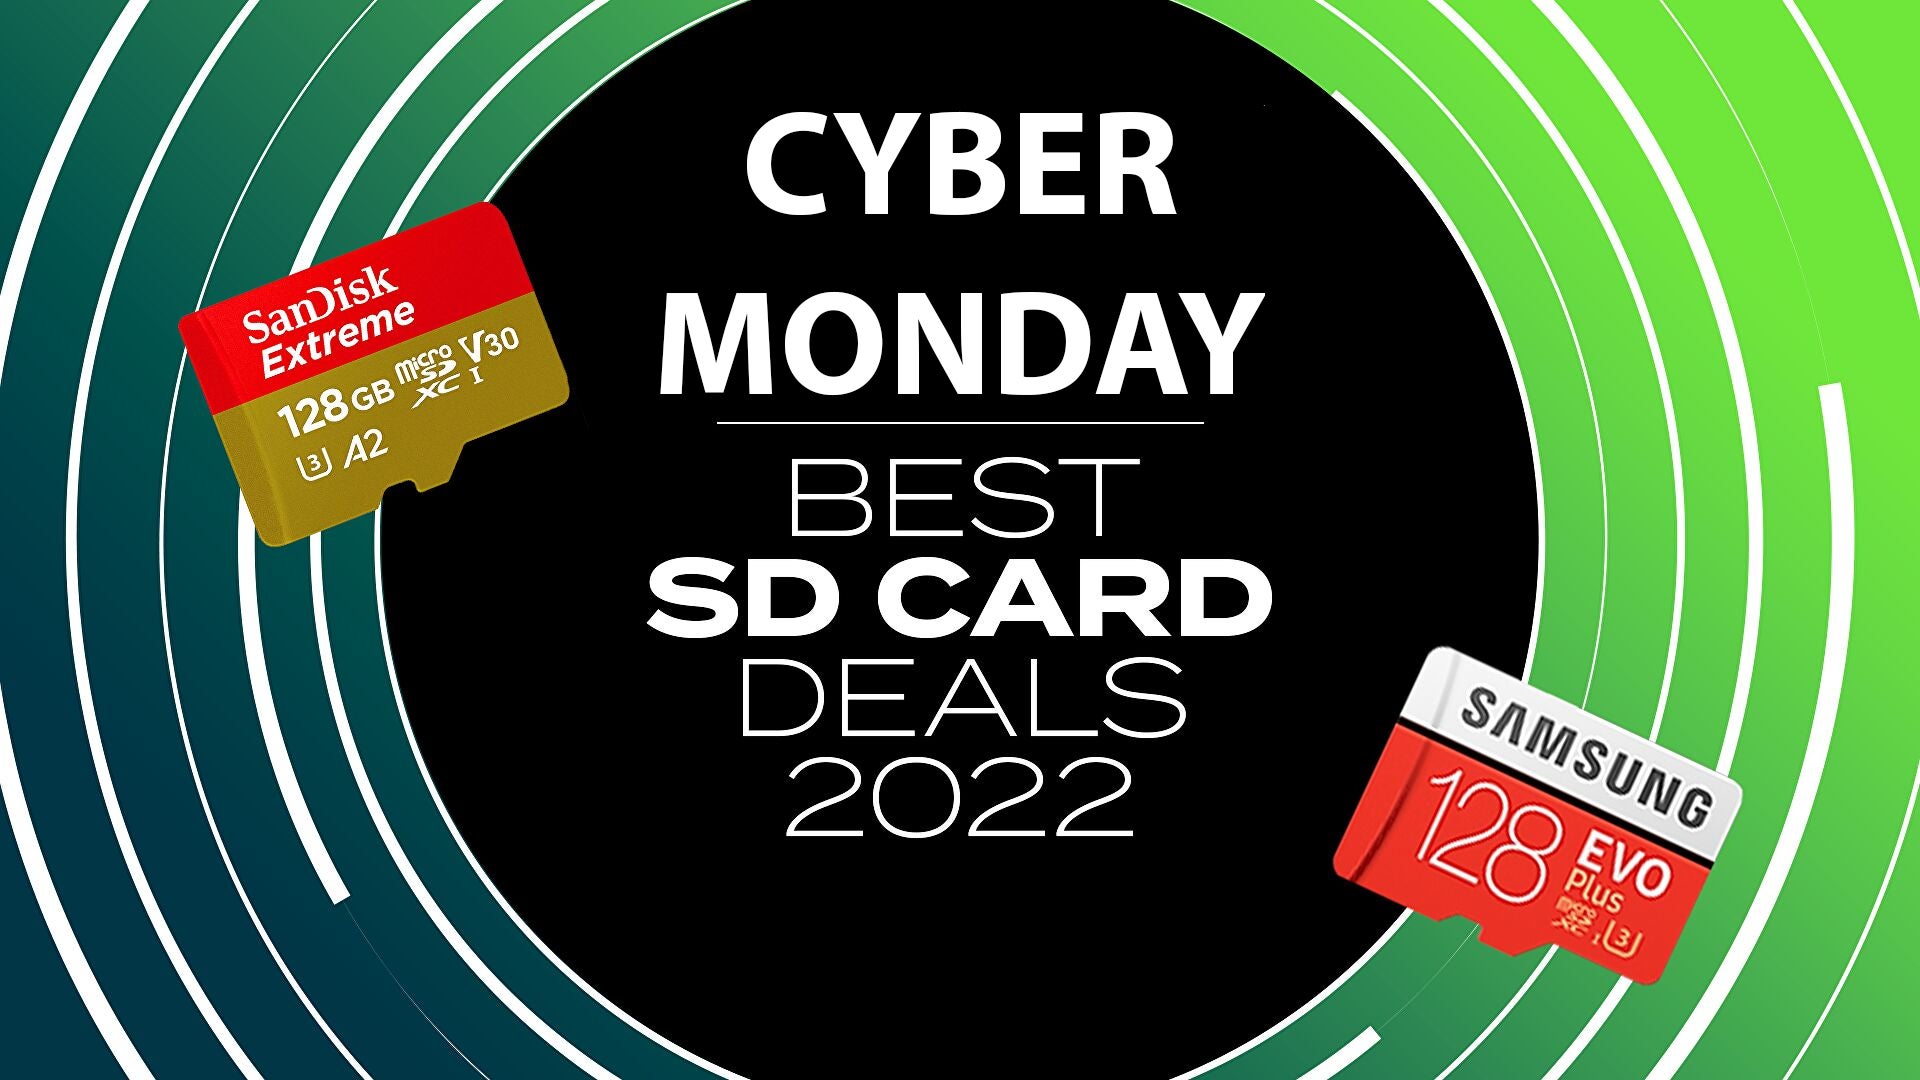 Image for Cyber Monday SD card deals 2022: best offers and discounts